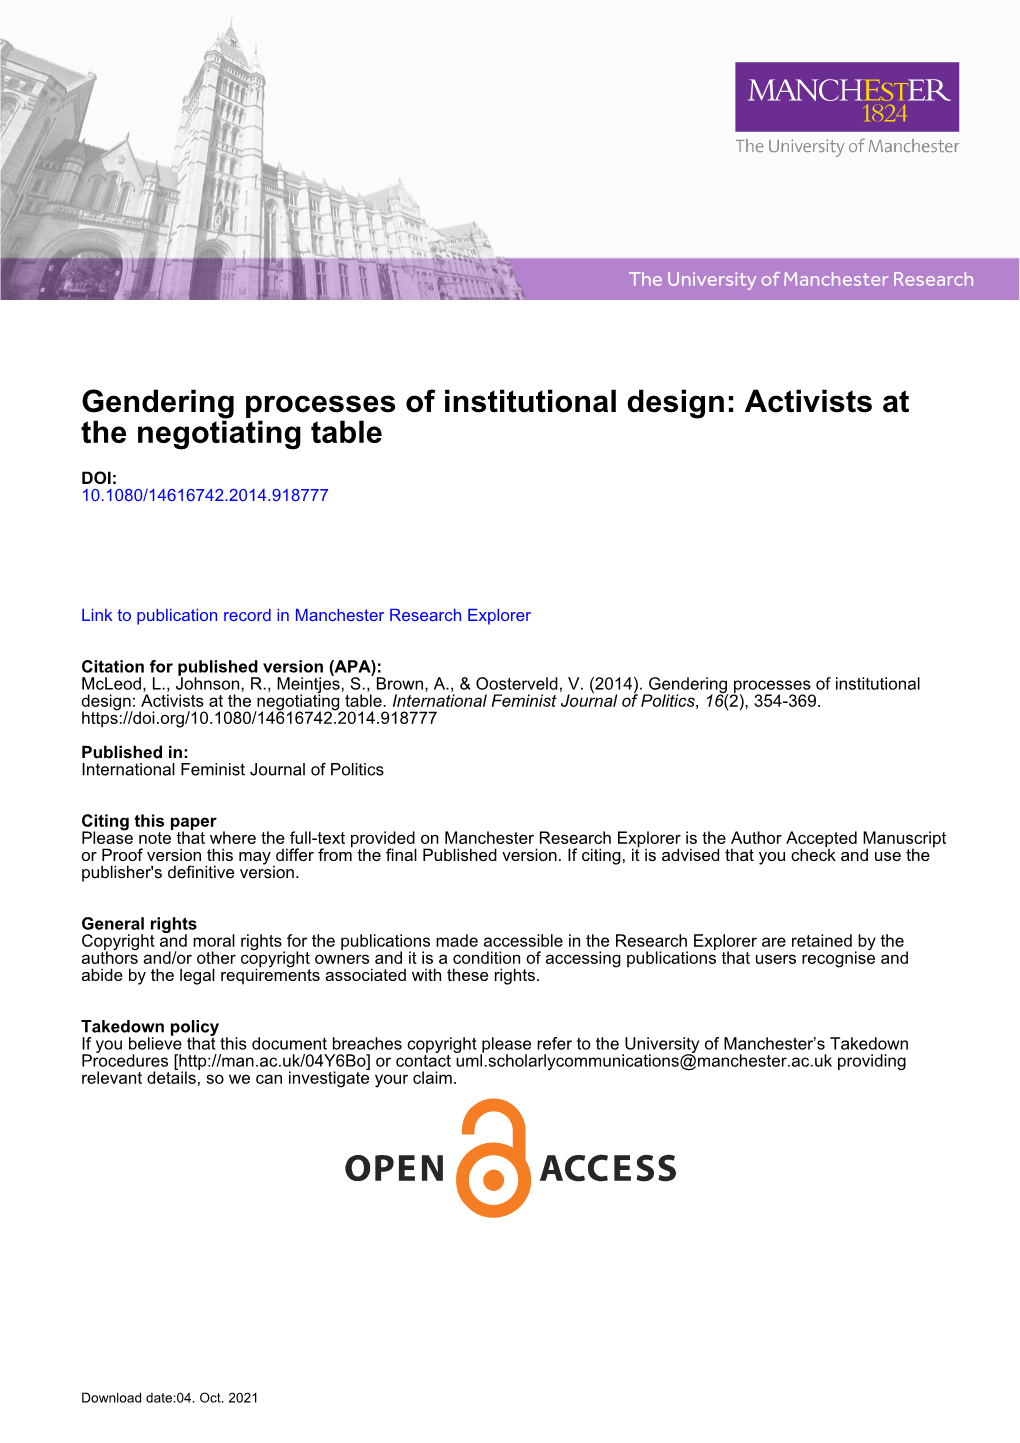 Gendering Processes of Institutional Design: Activists at the Negotiating Table